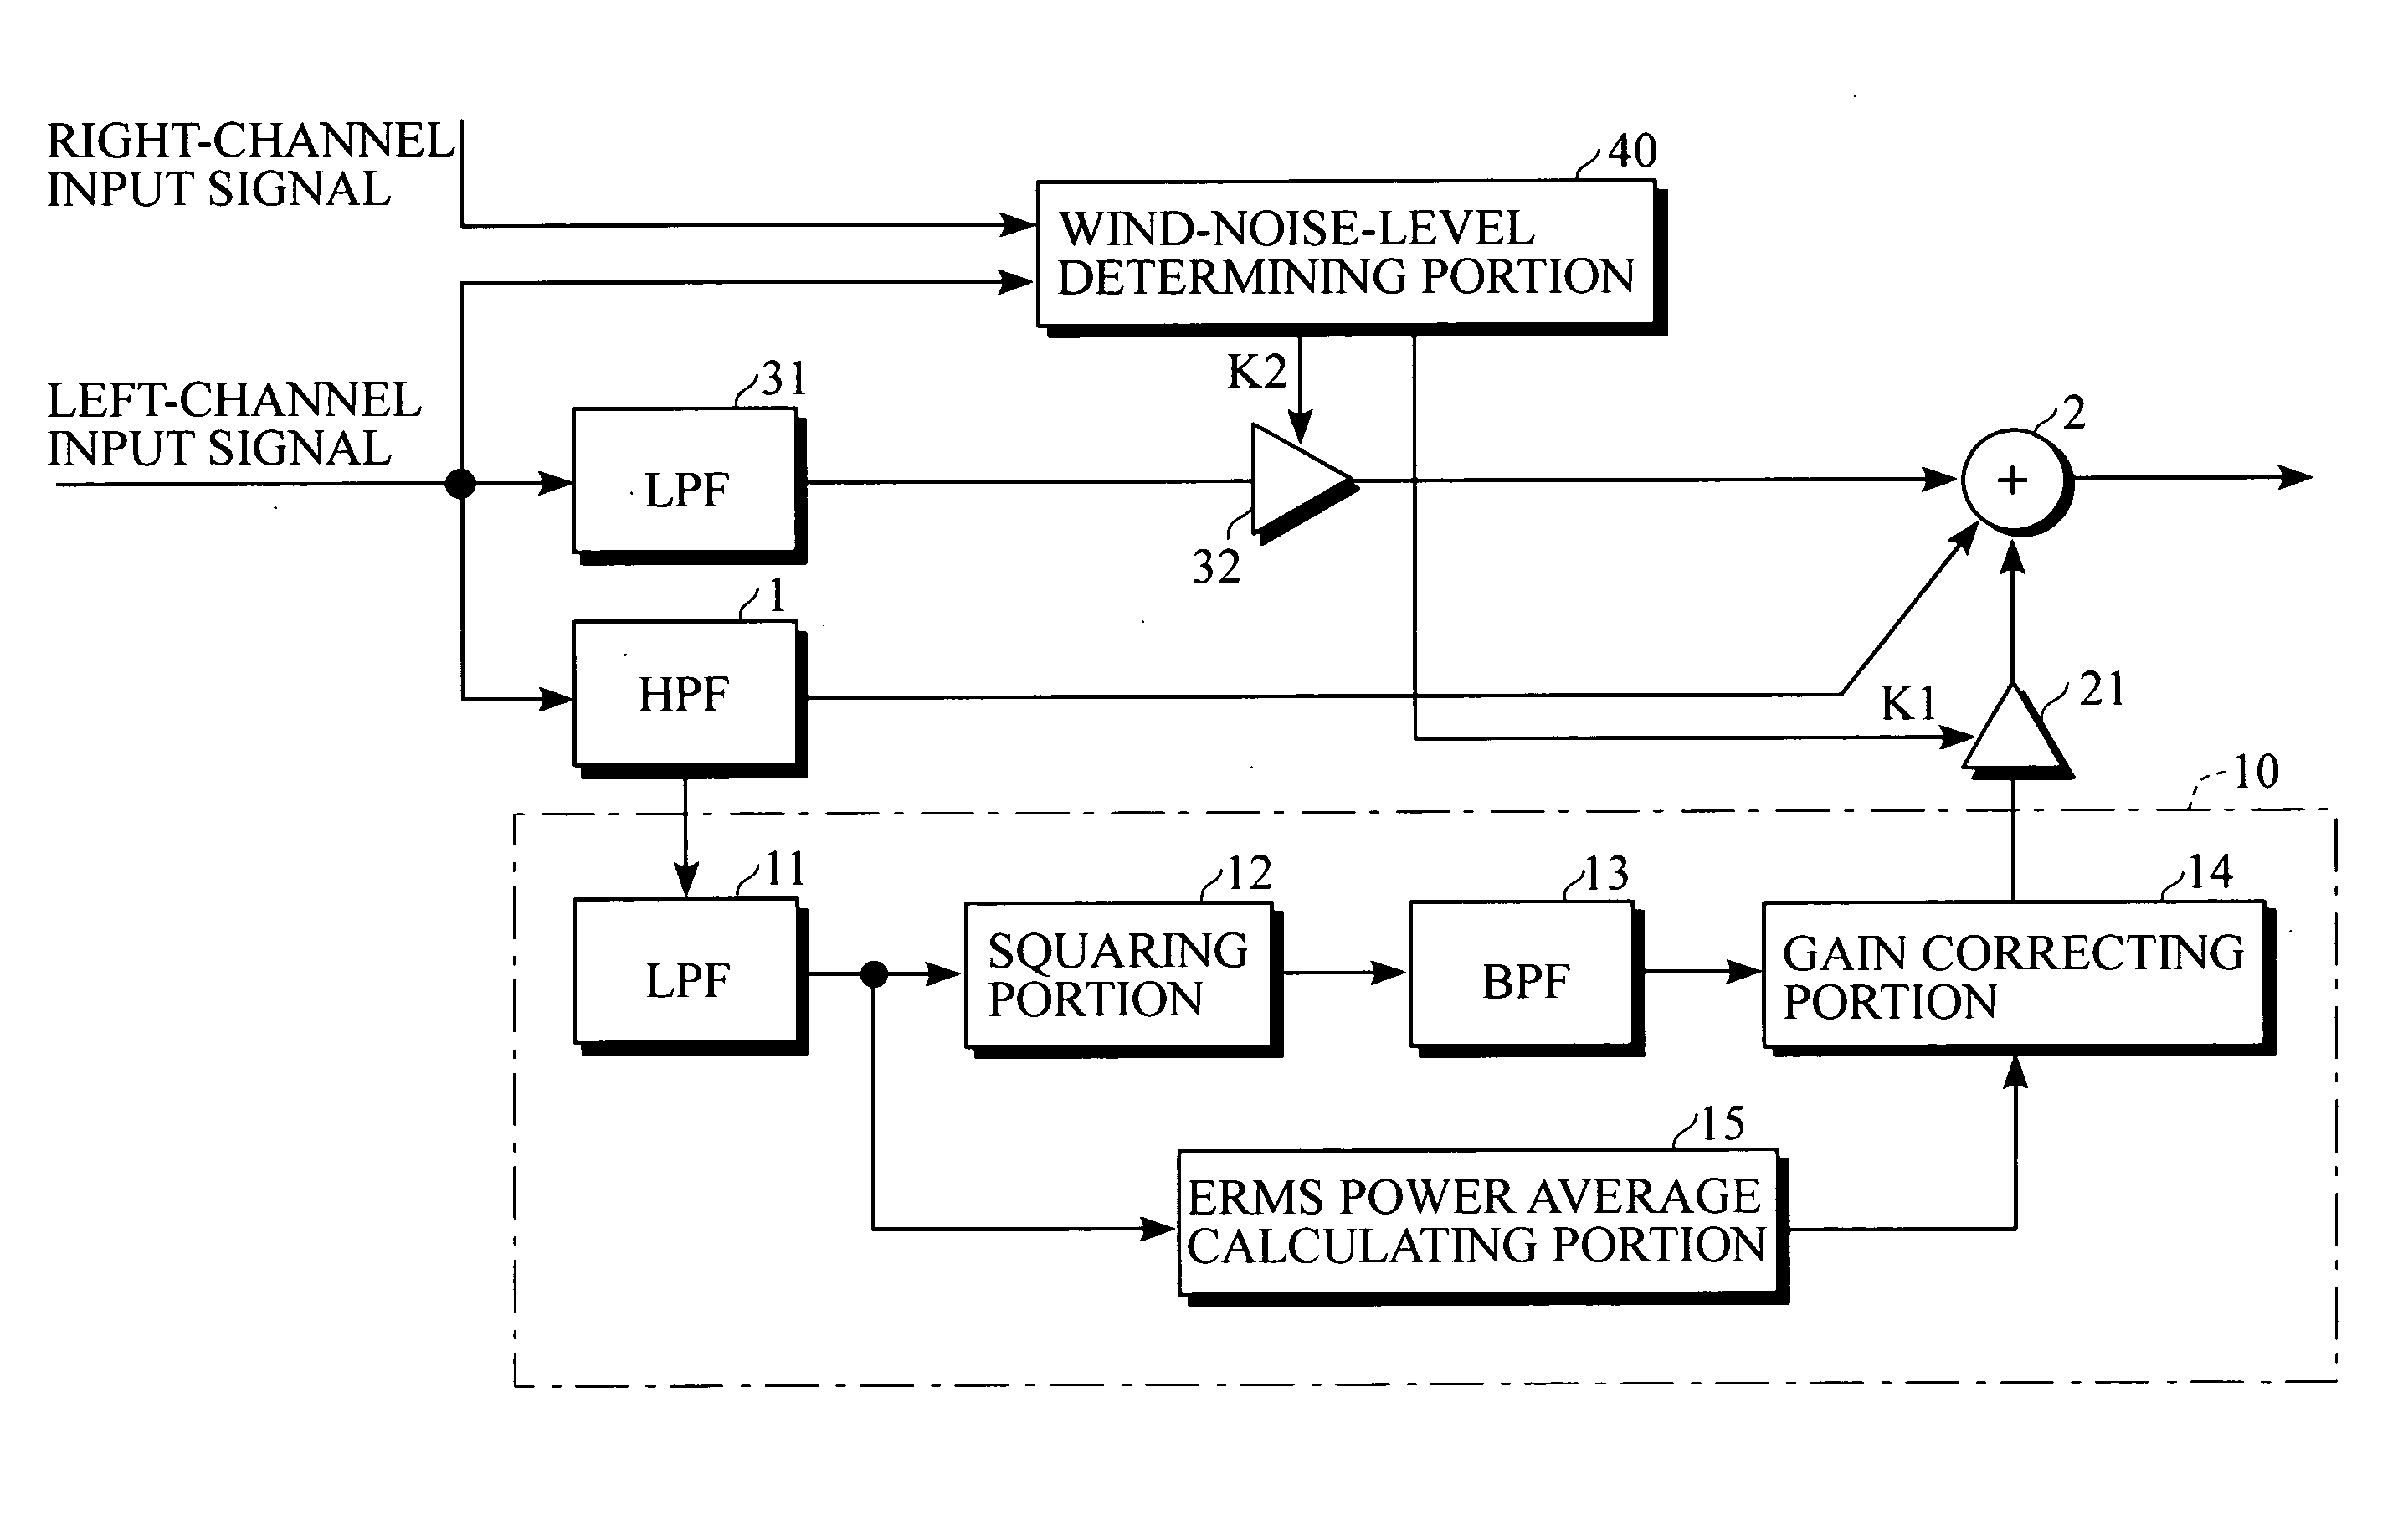 Low-frequency-band voice reconstructing device, voice signal processor and recording apparatus